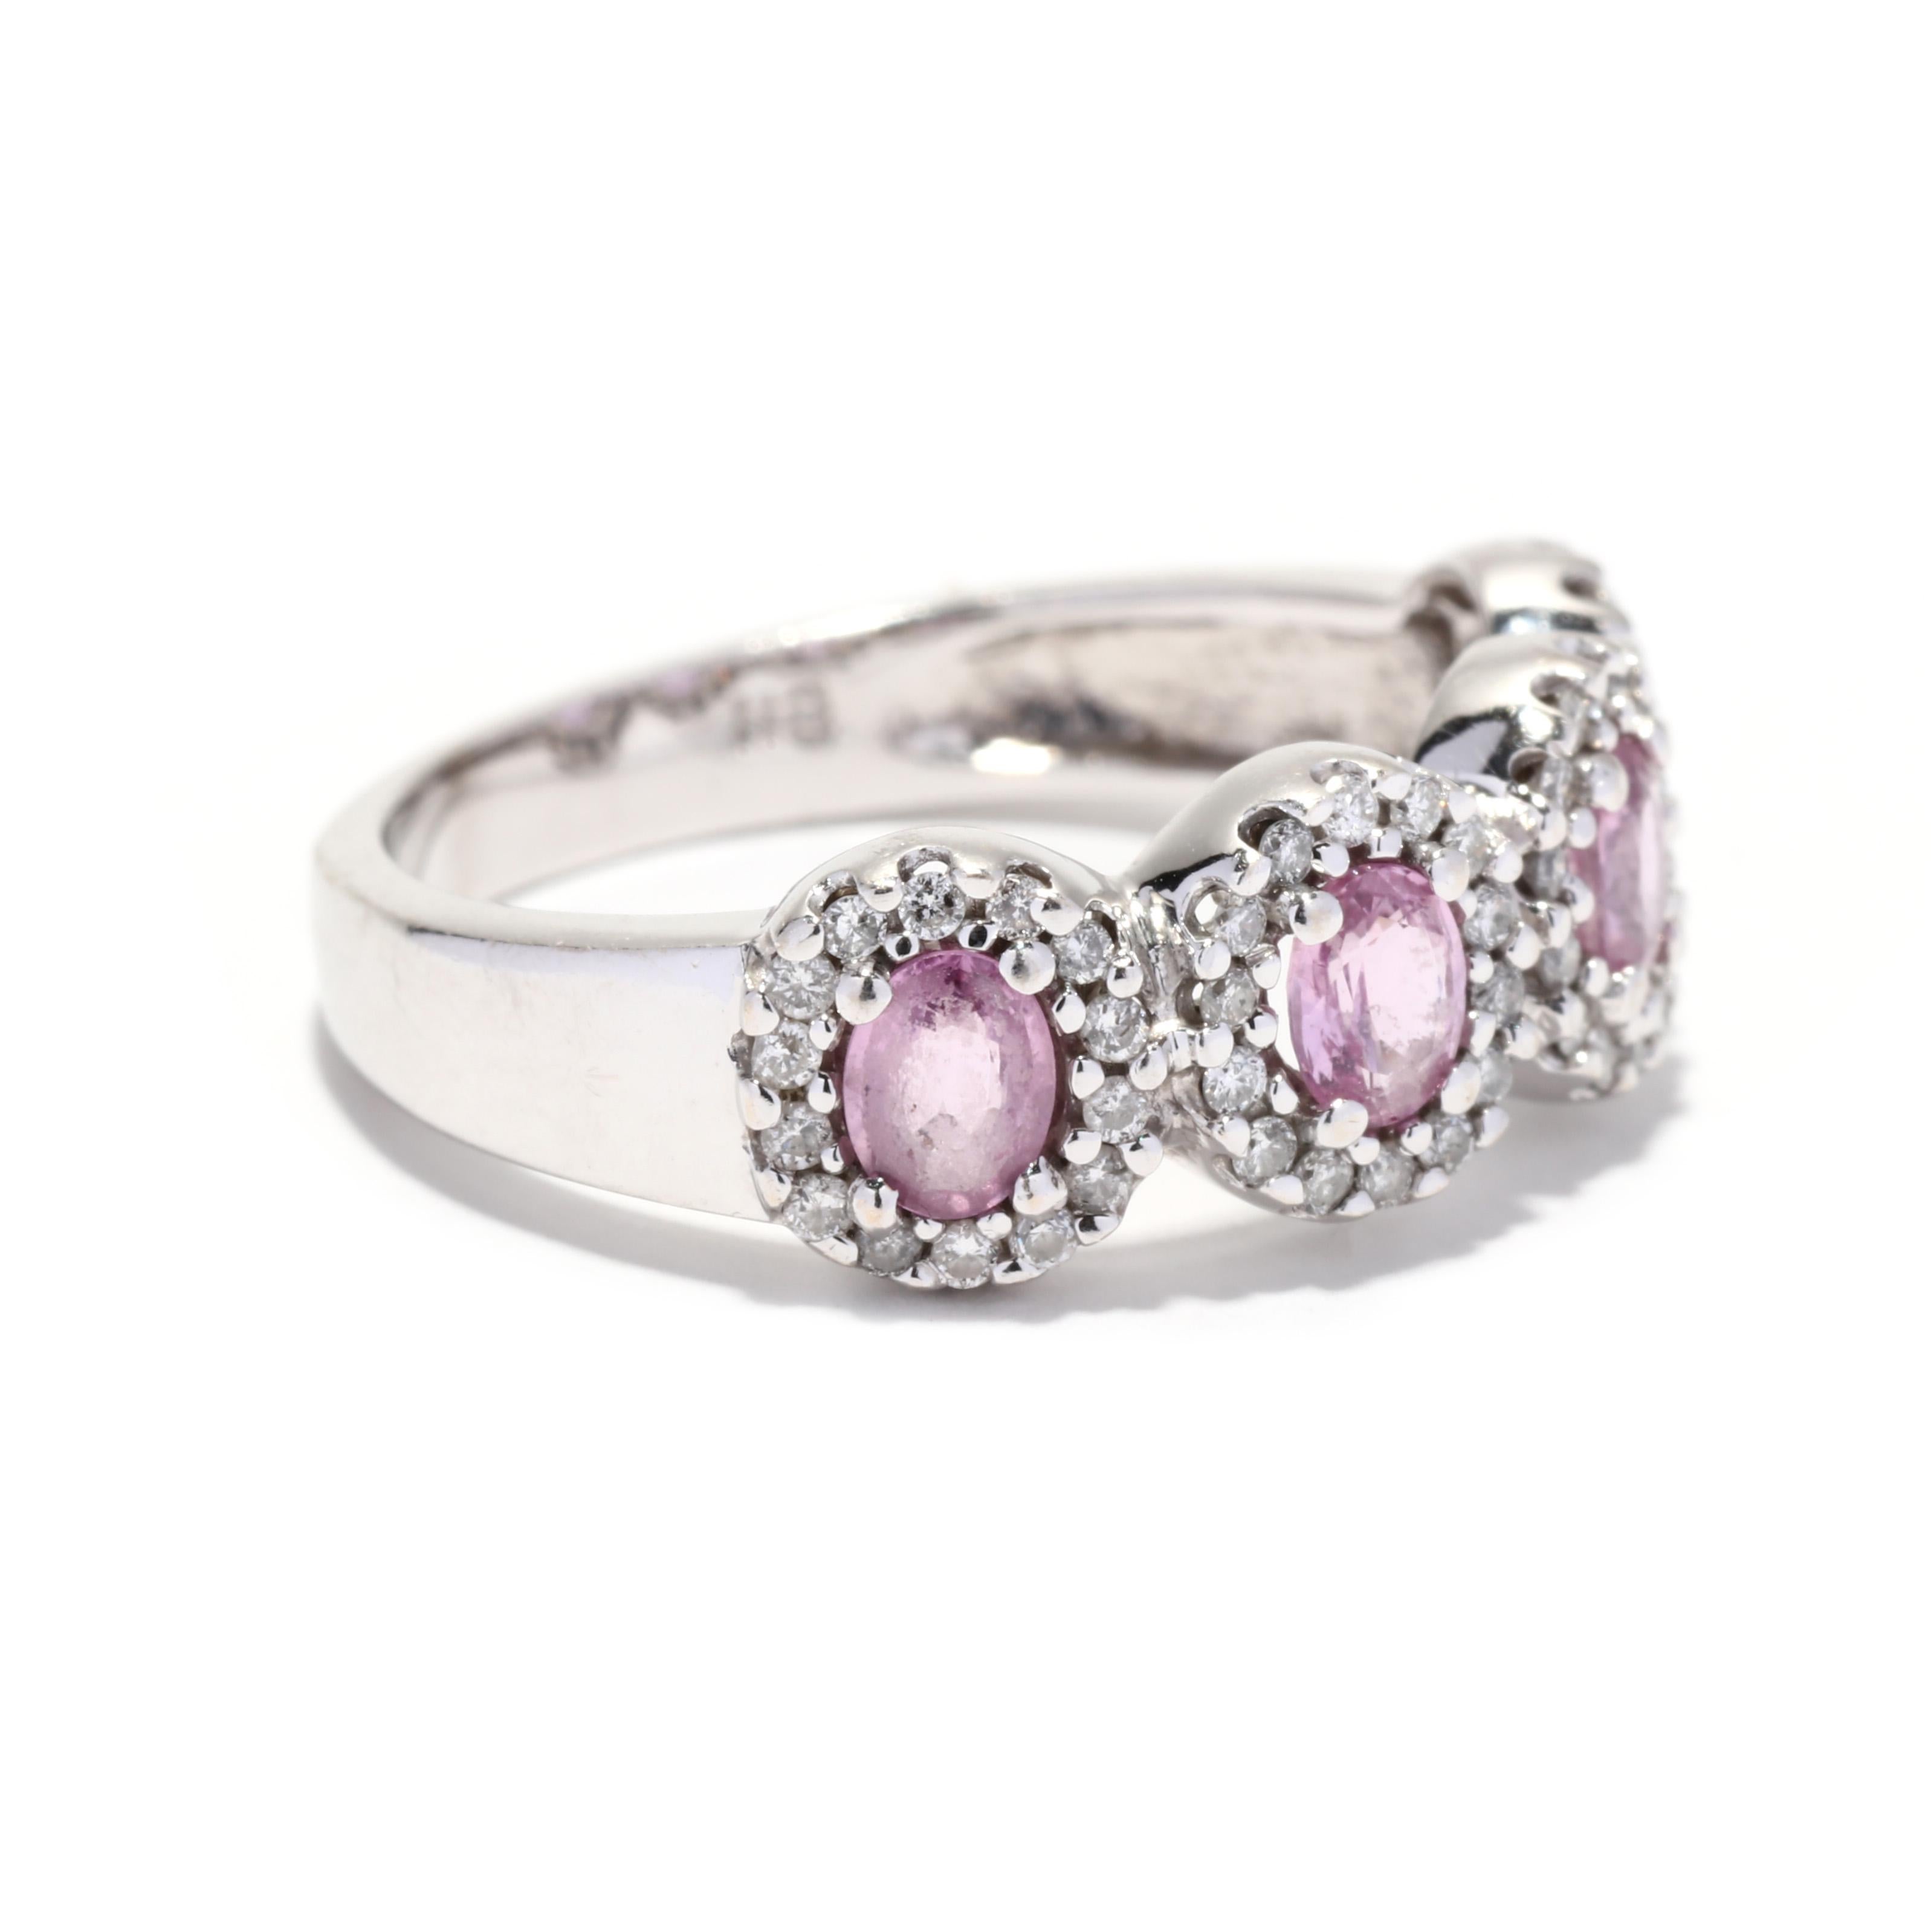 A vintage 14 karat white gold pink sapphire and diamond four stone halo band ring. This wide band features four oval cut pink sapphires weighing approximately 1 total carat, each surrounded by halo of full cut round diamonds weighing approximately